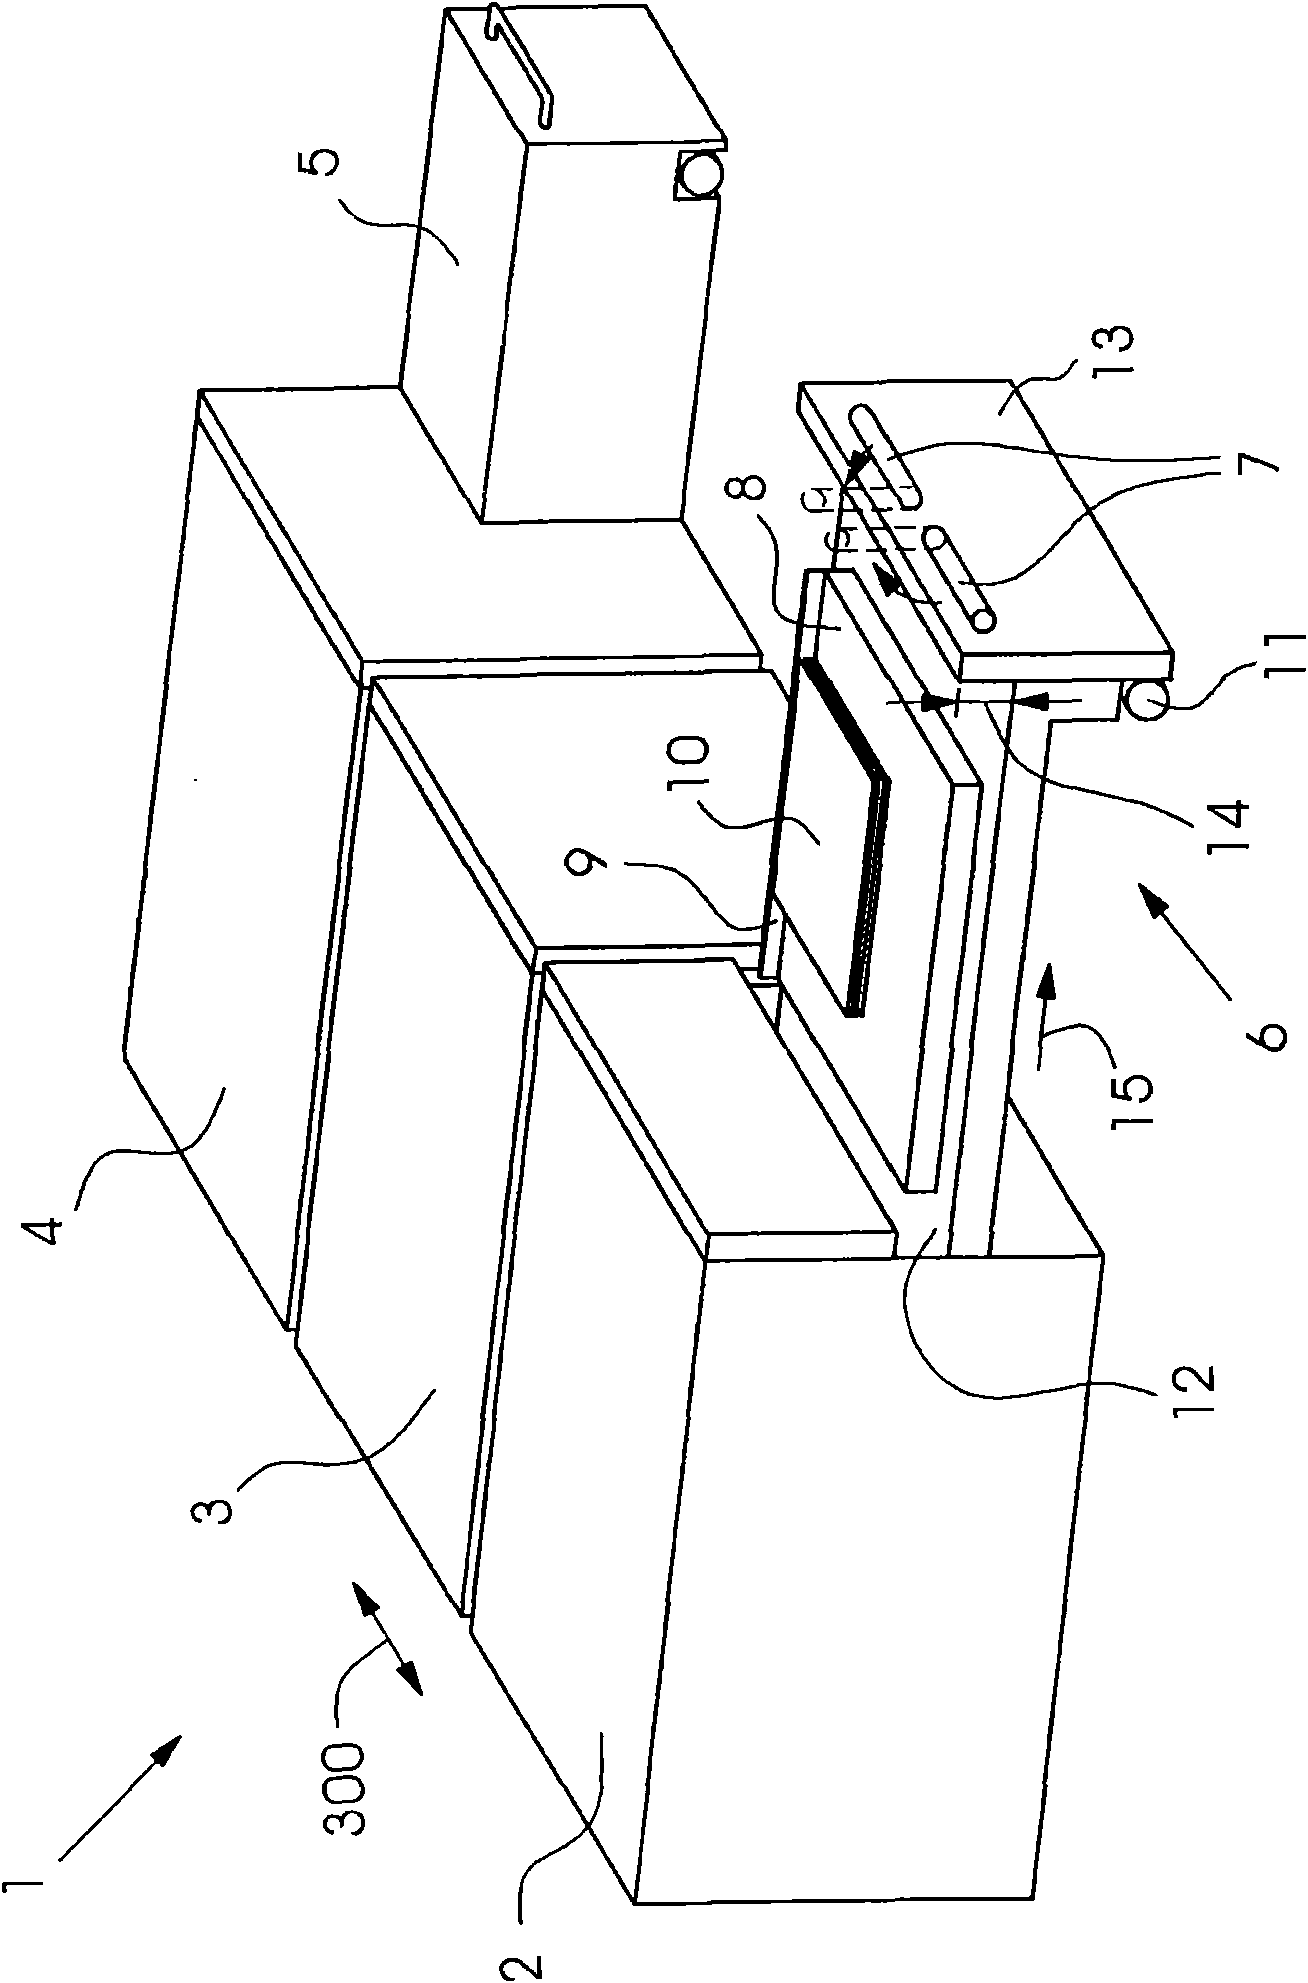 A transmission device for handling printing plates and tray